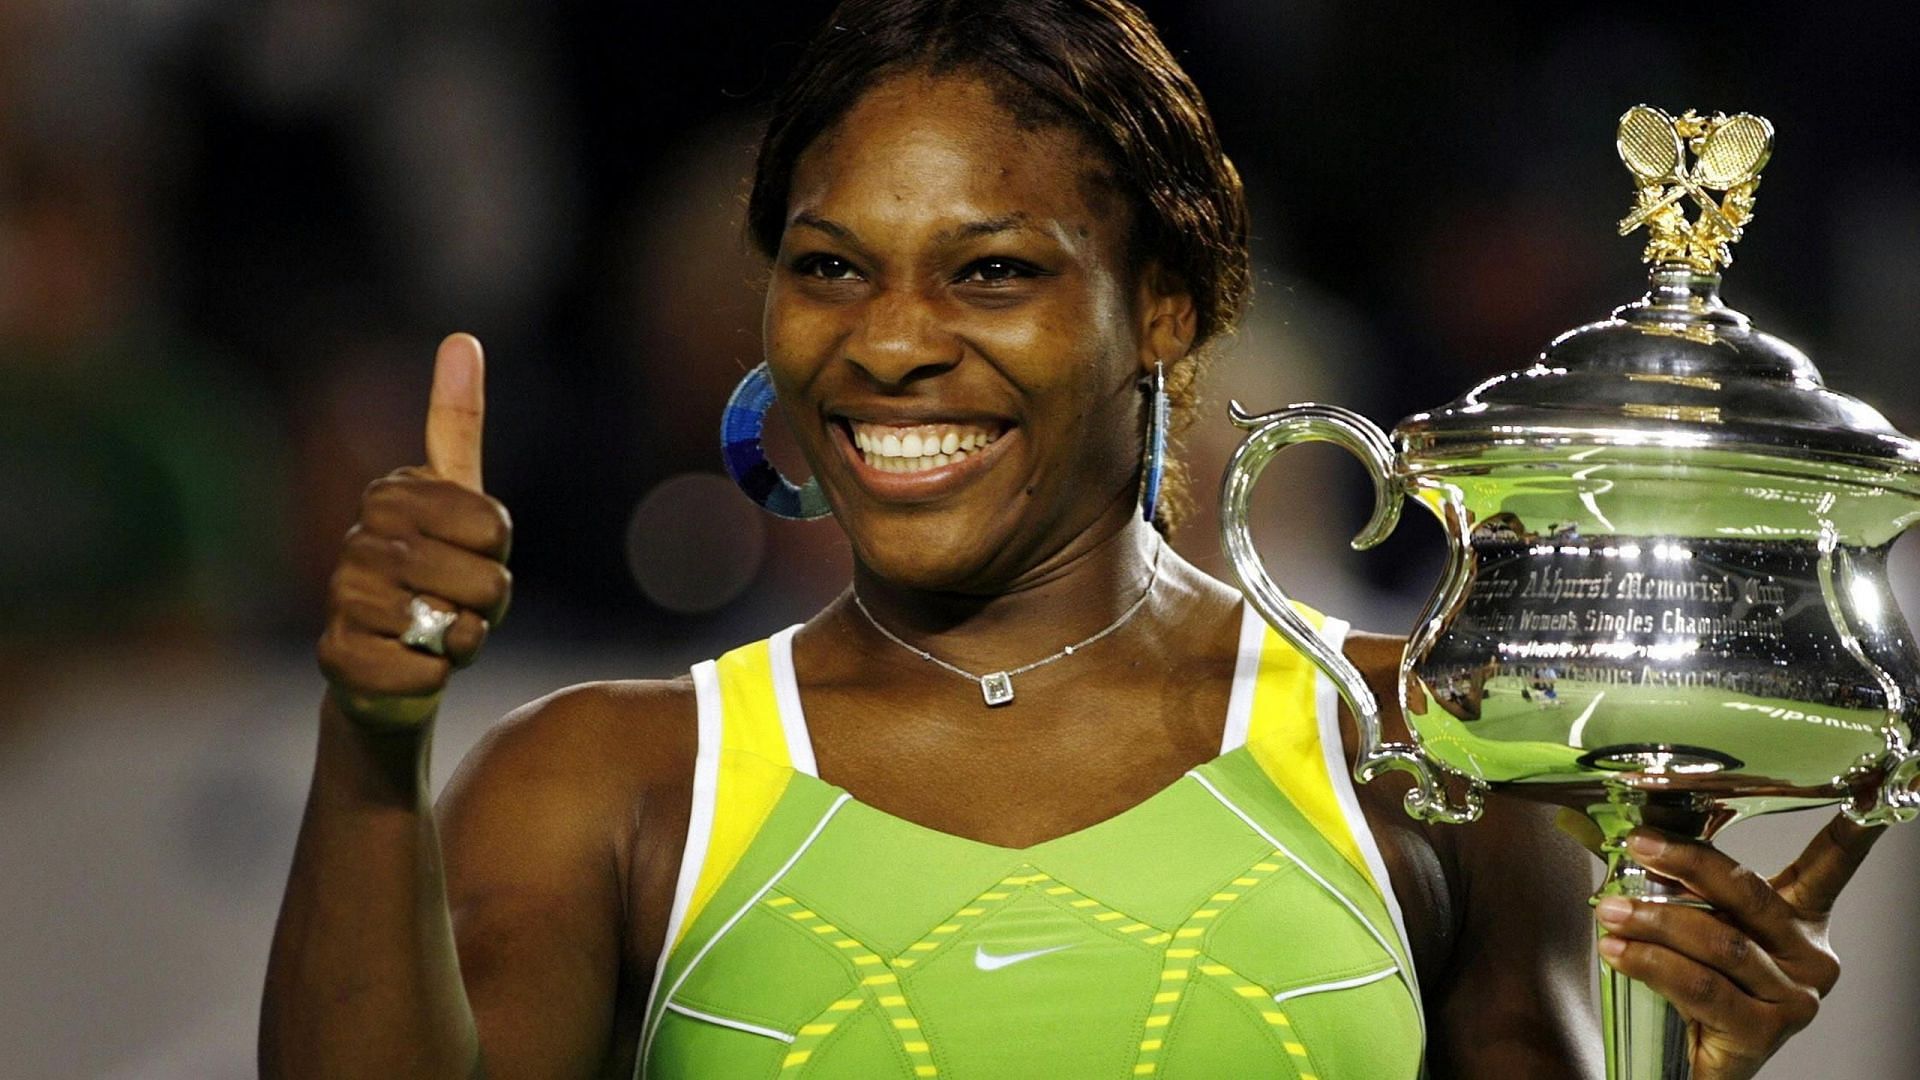 Serena Williams appears to be ecstatic after winning the 2007 Australian Open title